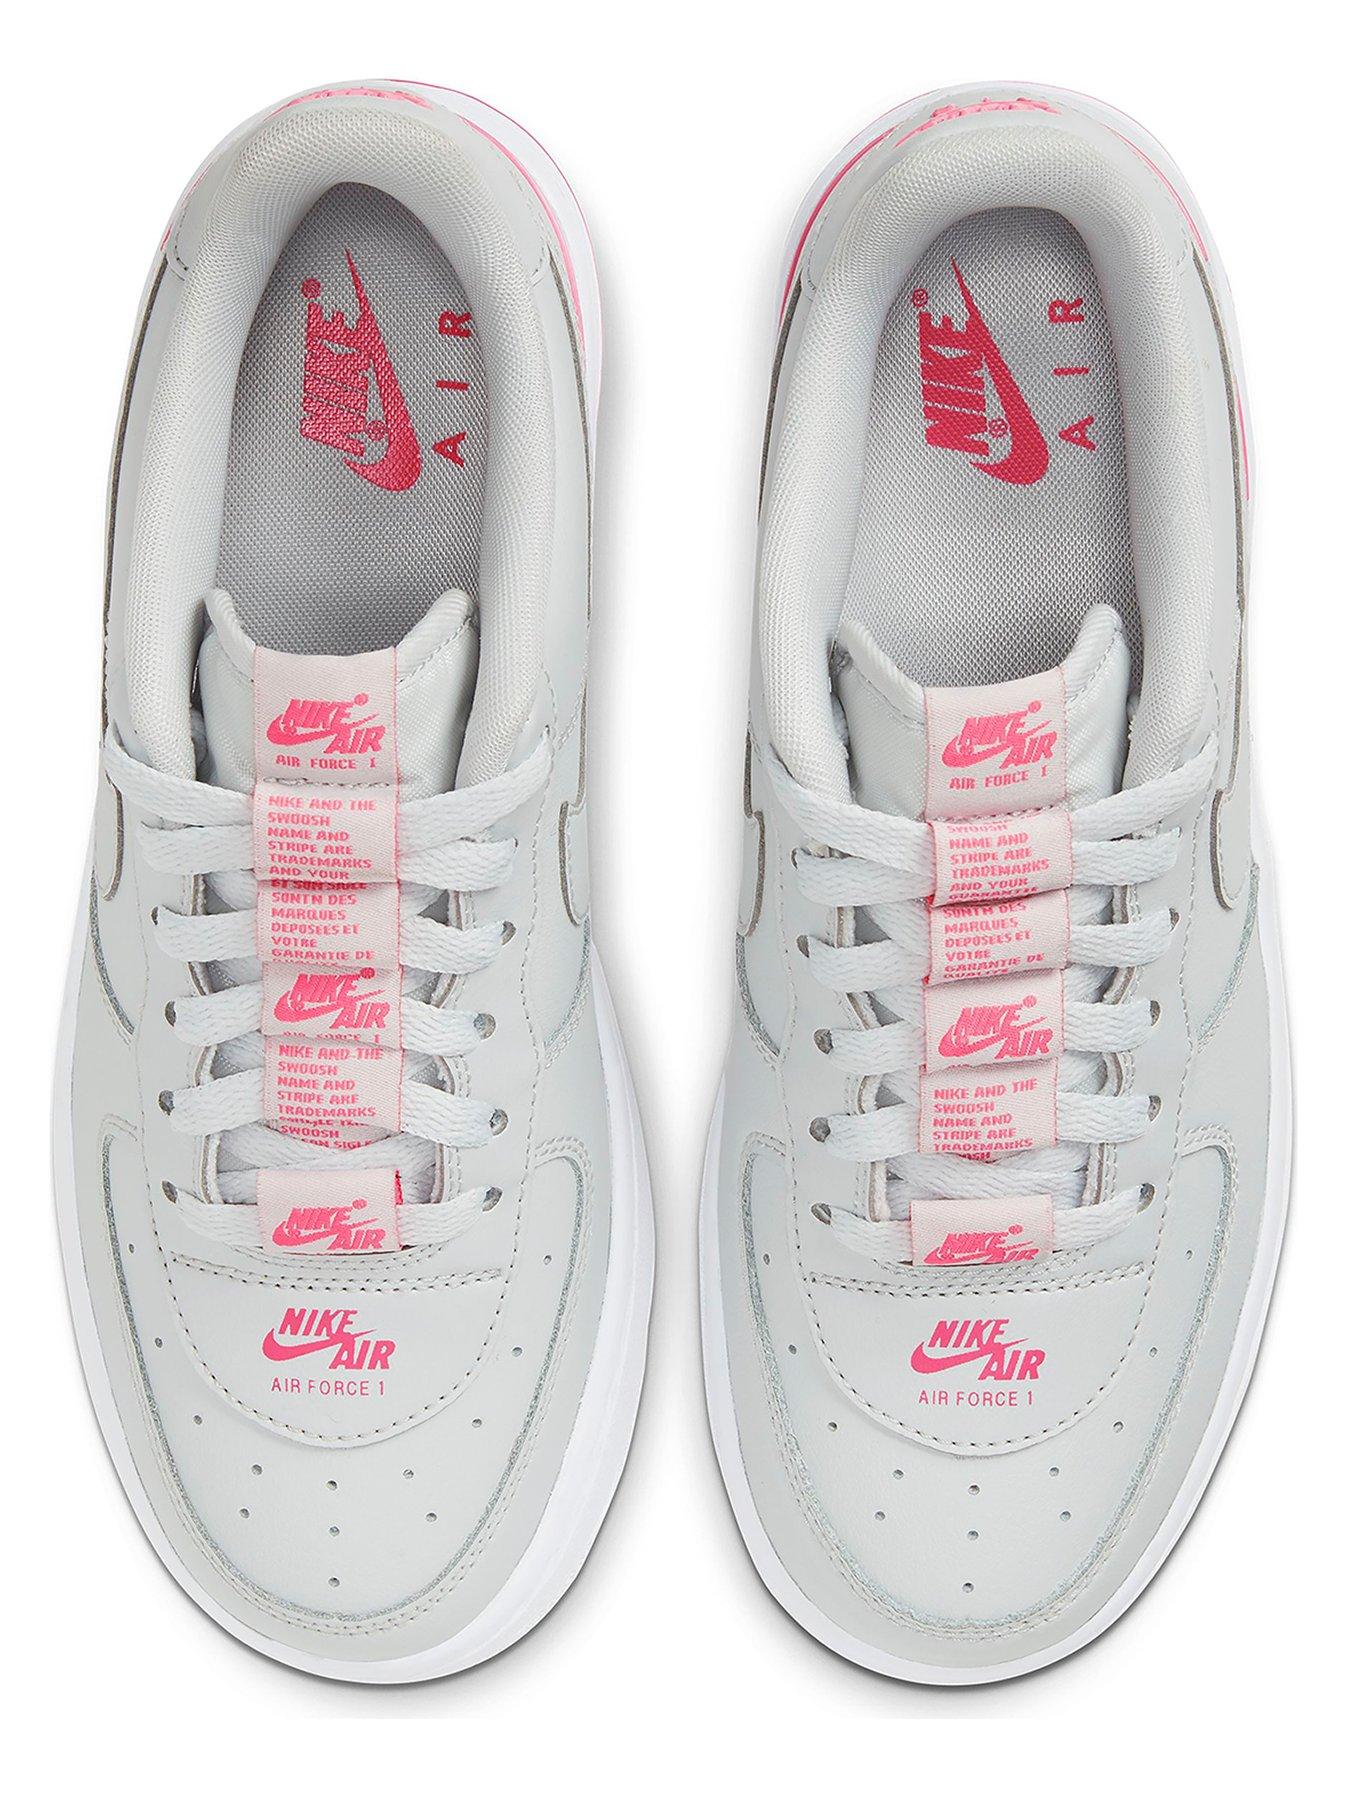 Nike Air Force 1 LV8 3 Junior Trainers 